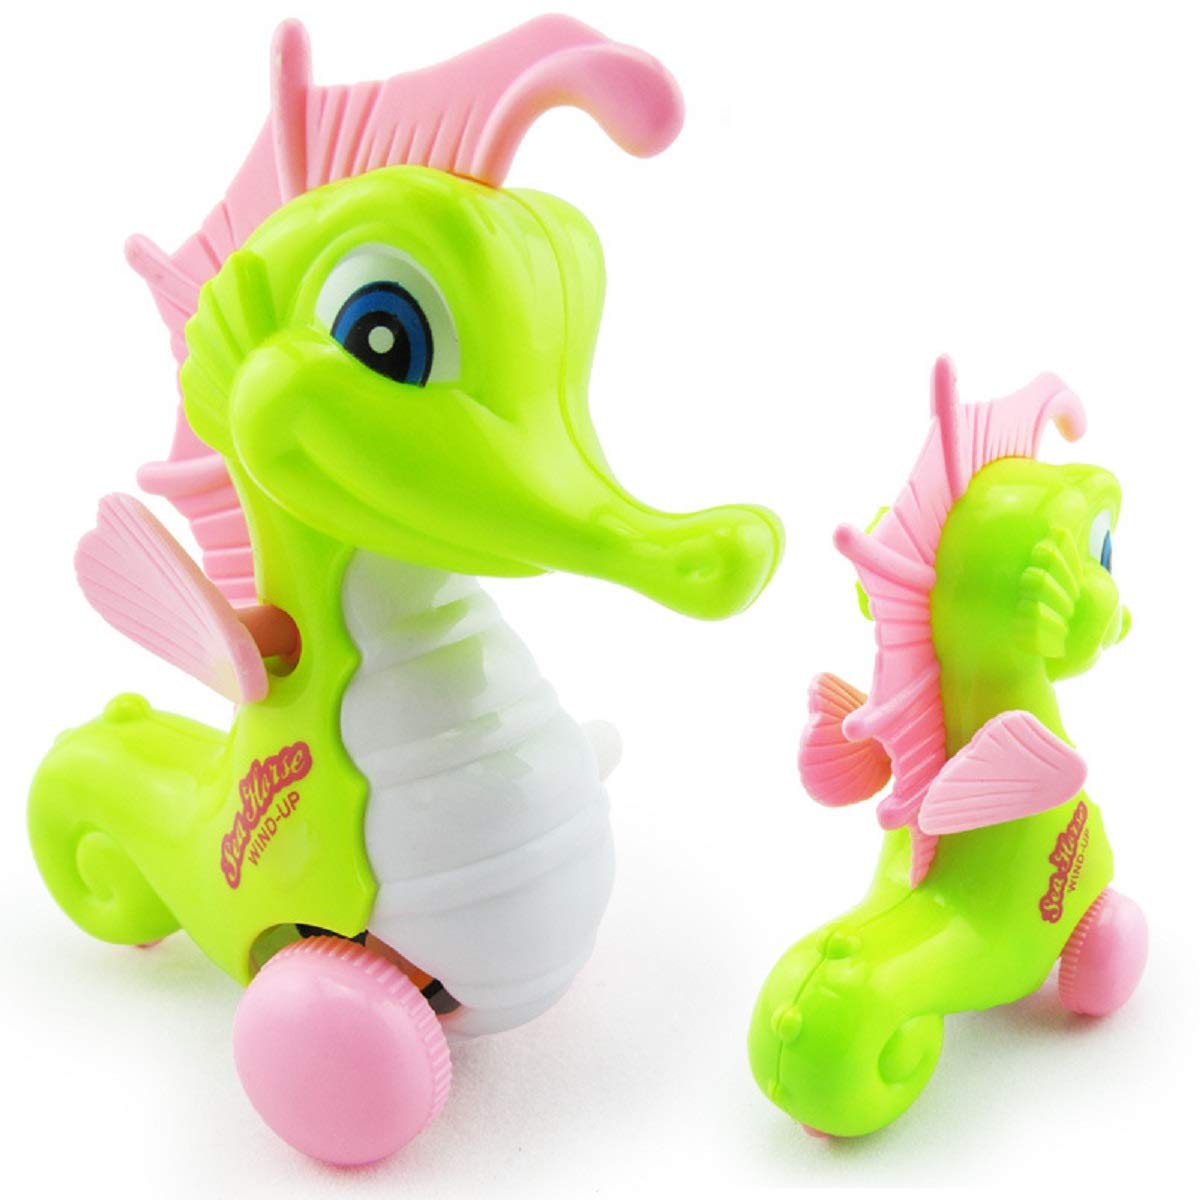 6 Pack Cartoon Walking Animal Hippocampus Wind-up Toy Party Favors Random Color